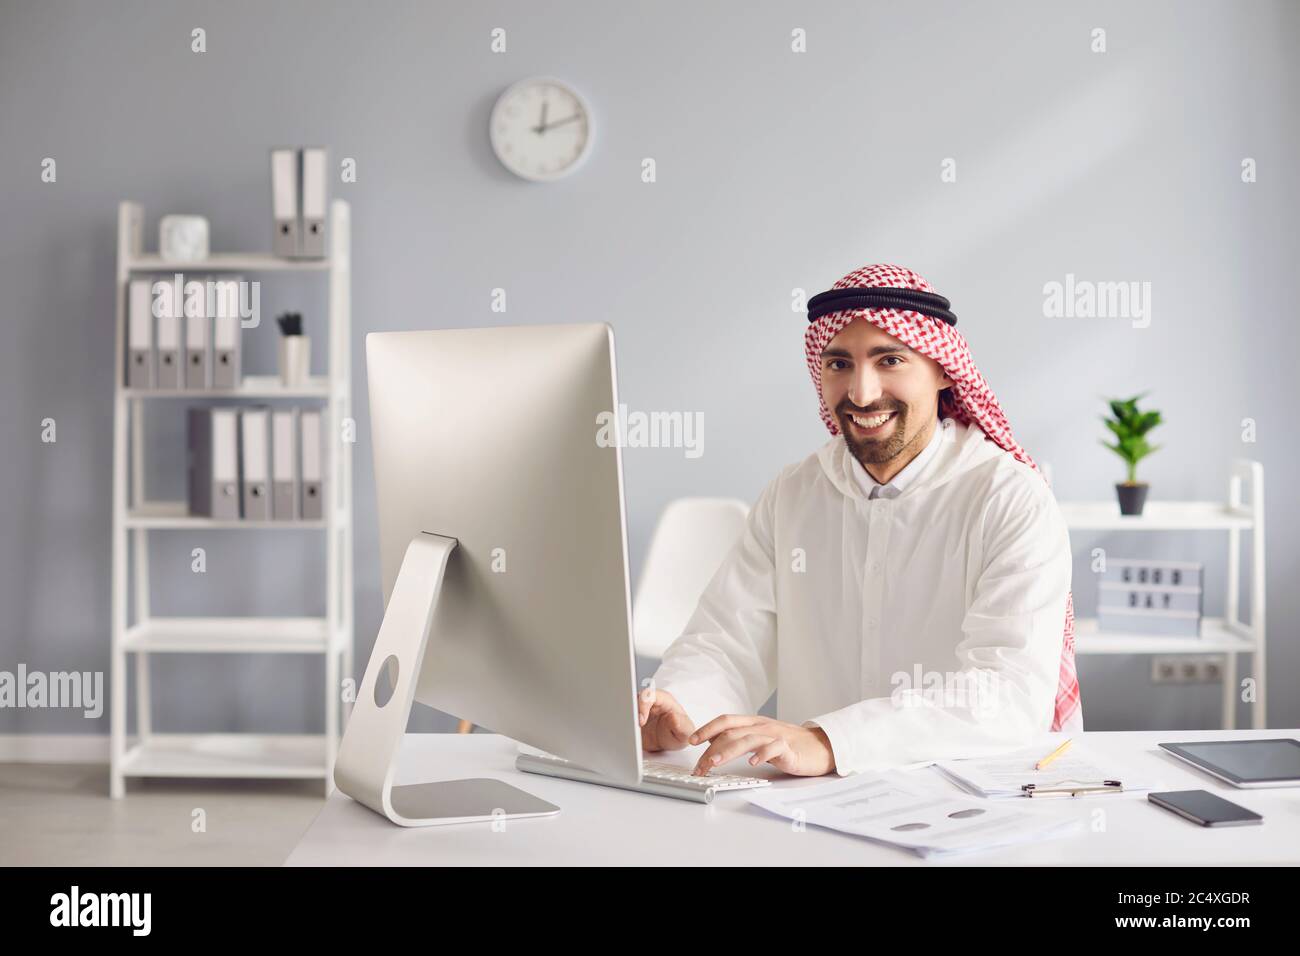 Arab man working analyzing typing at a table with a computer in the office. Stock Photo